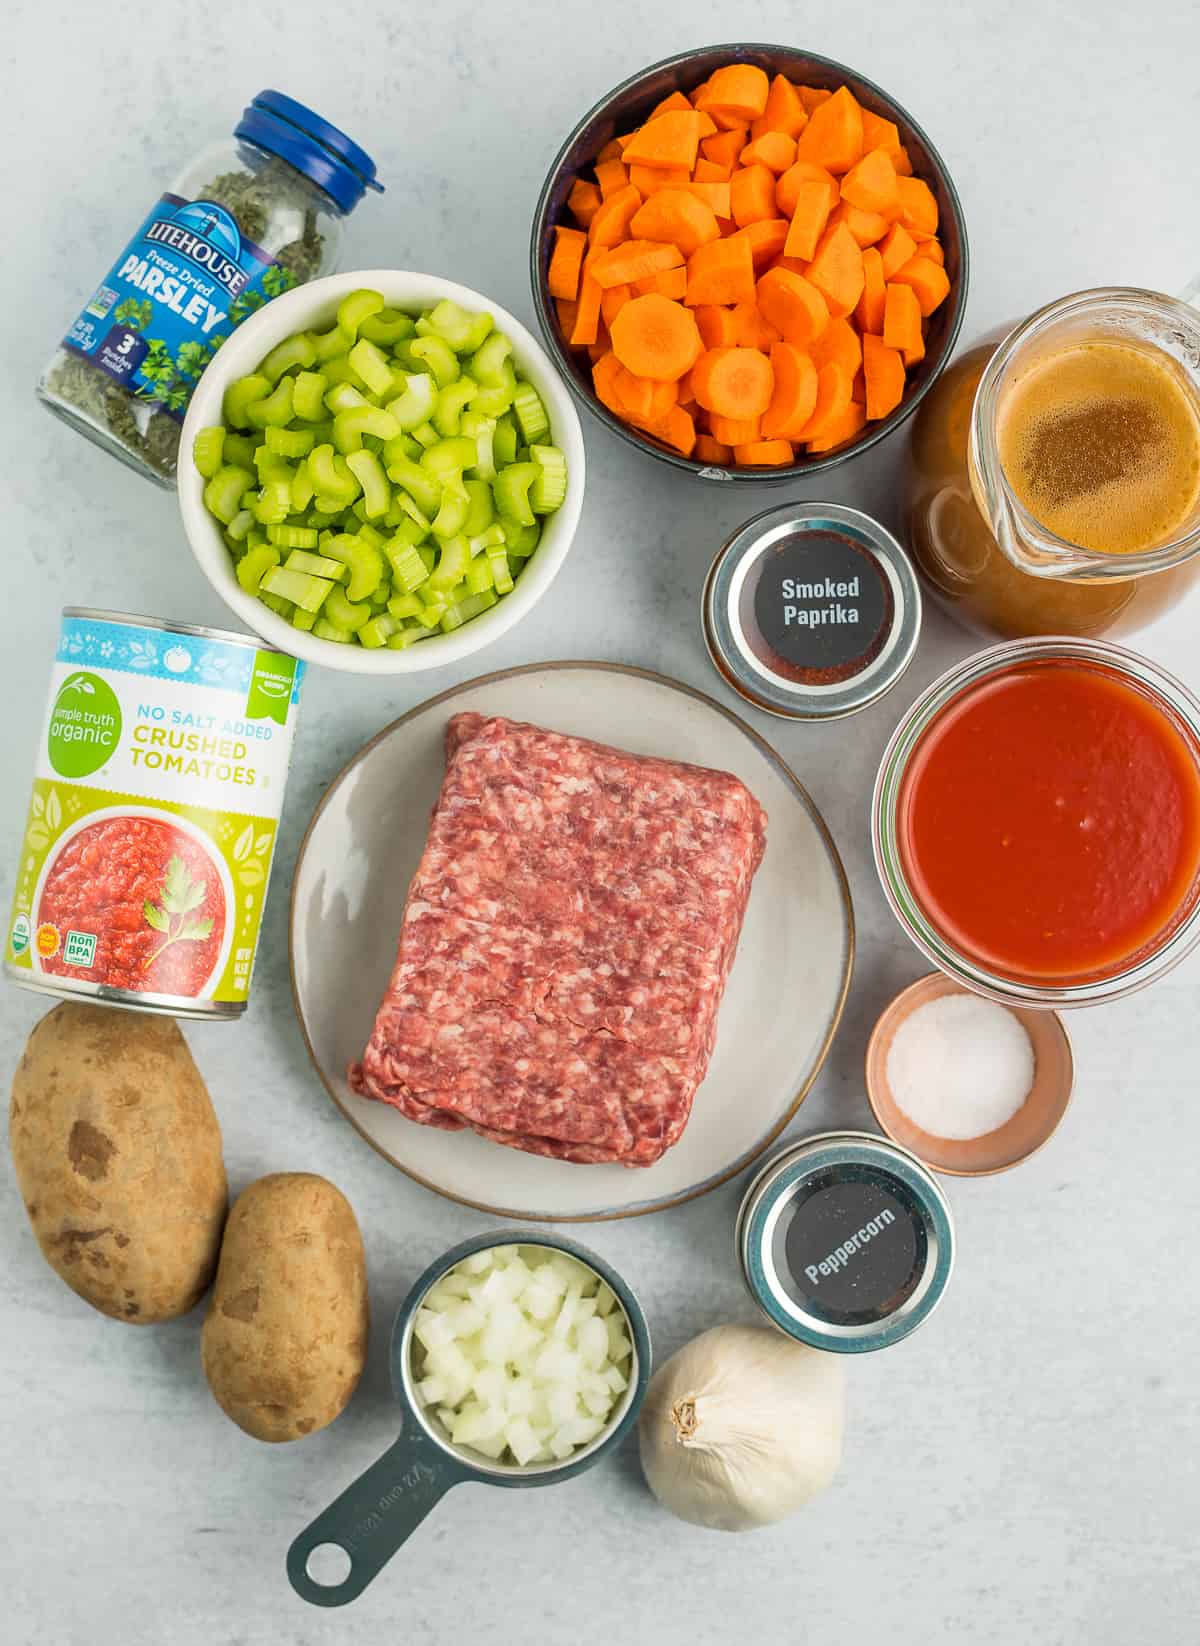 carrots, potato, onion, celery, burger, and other ingredients on a grey board.